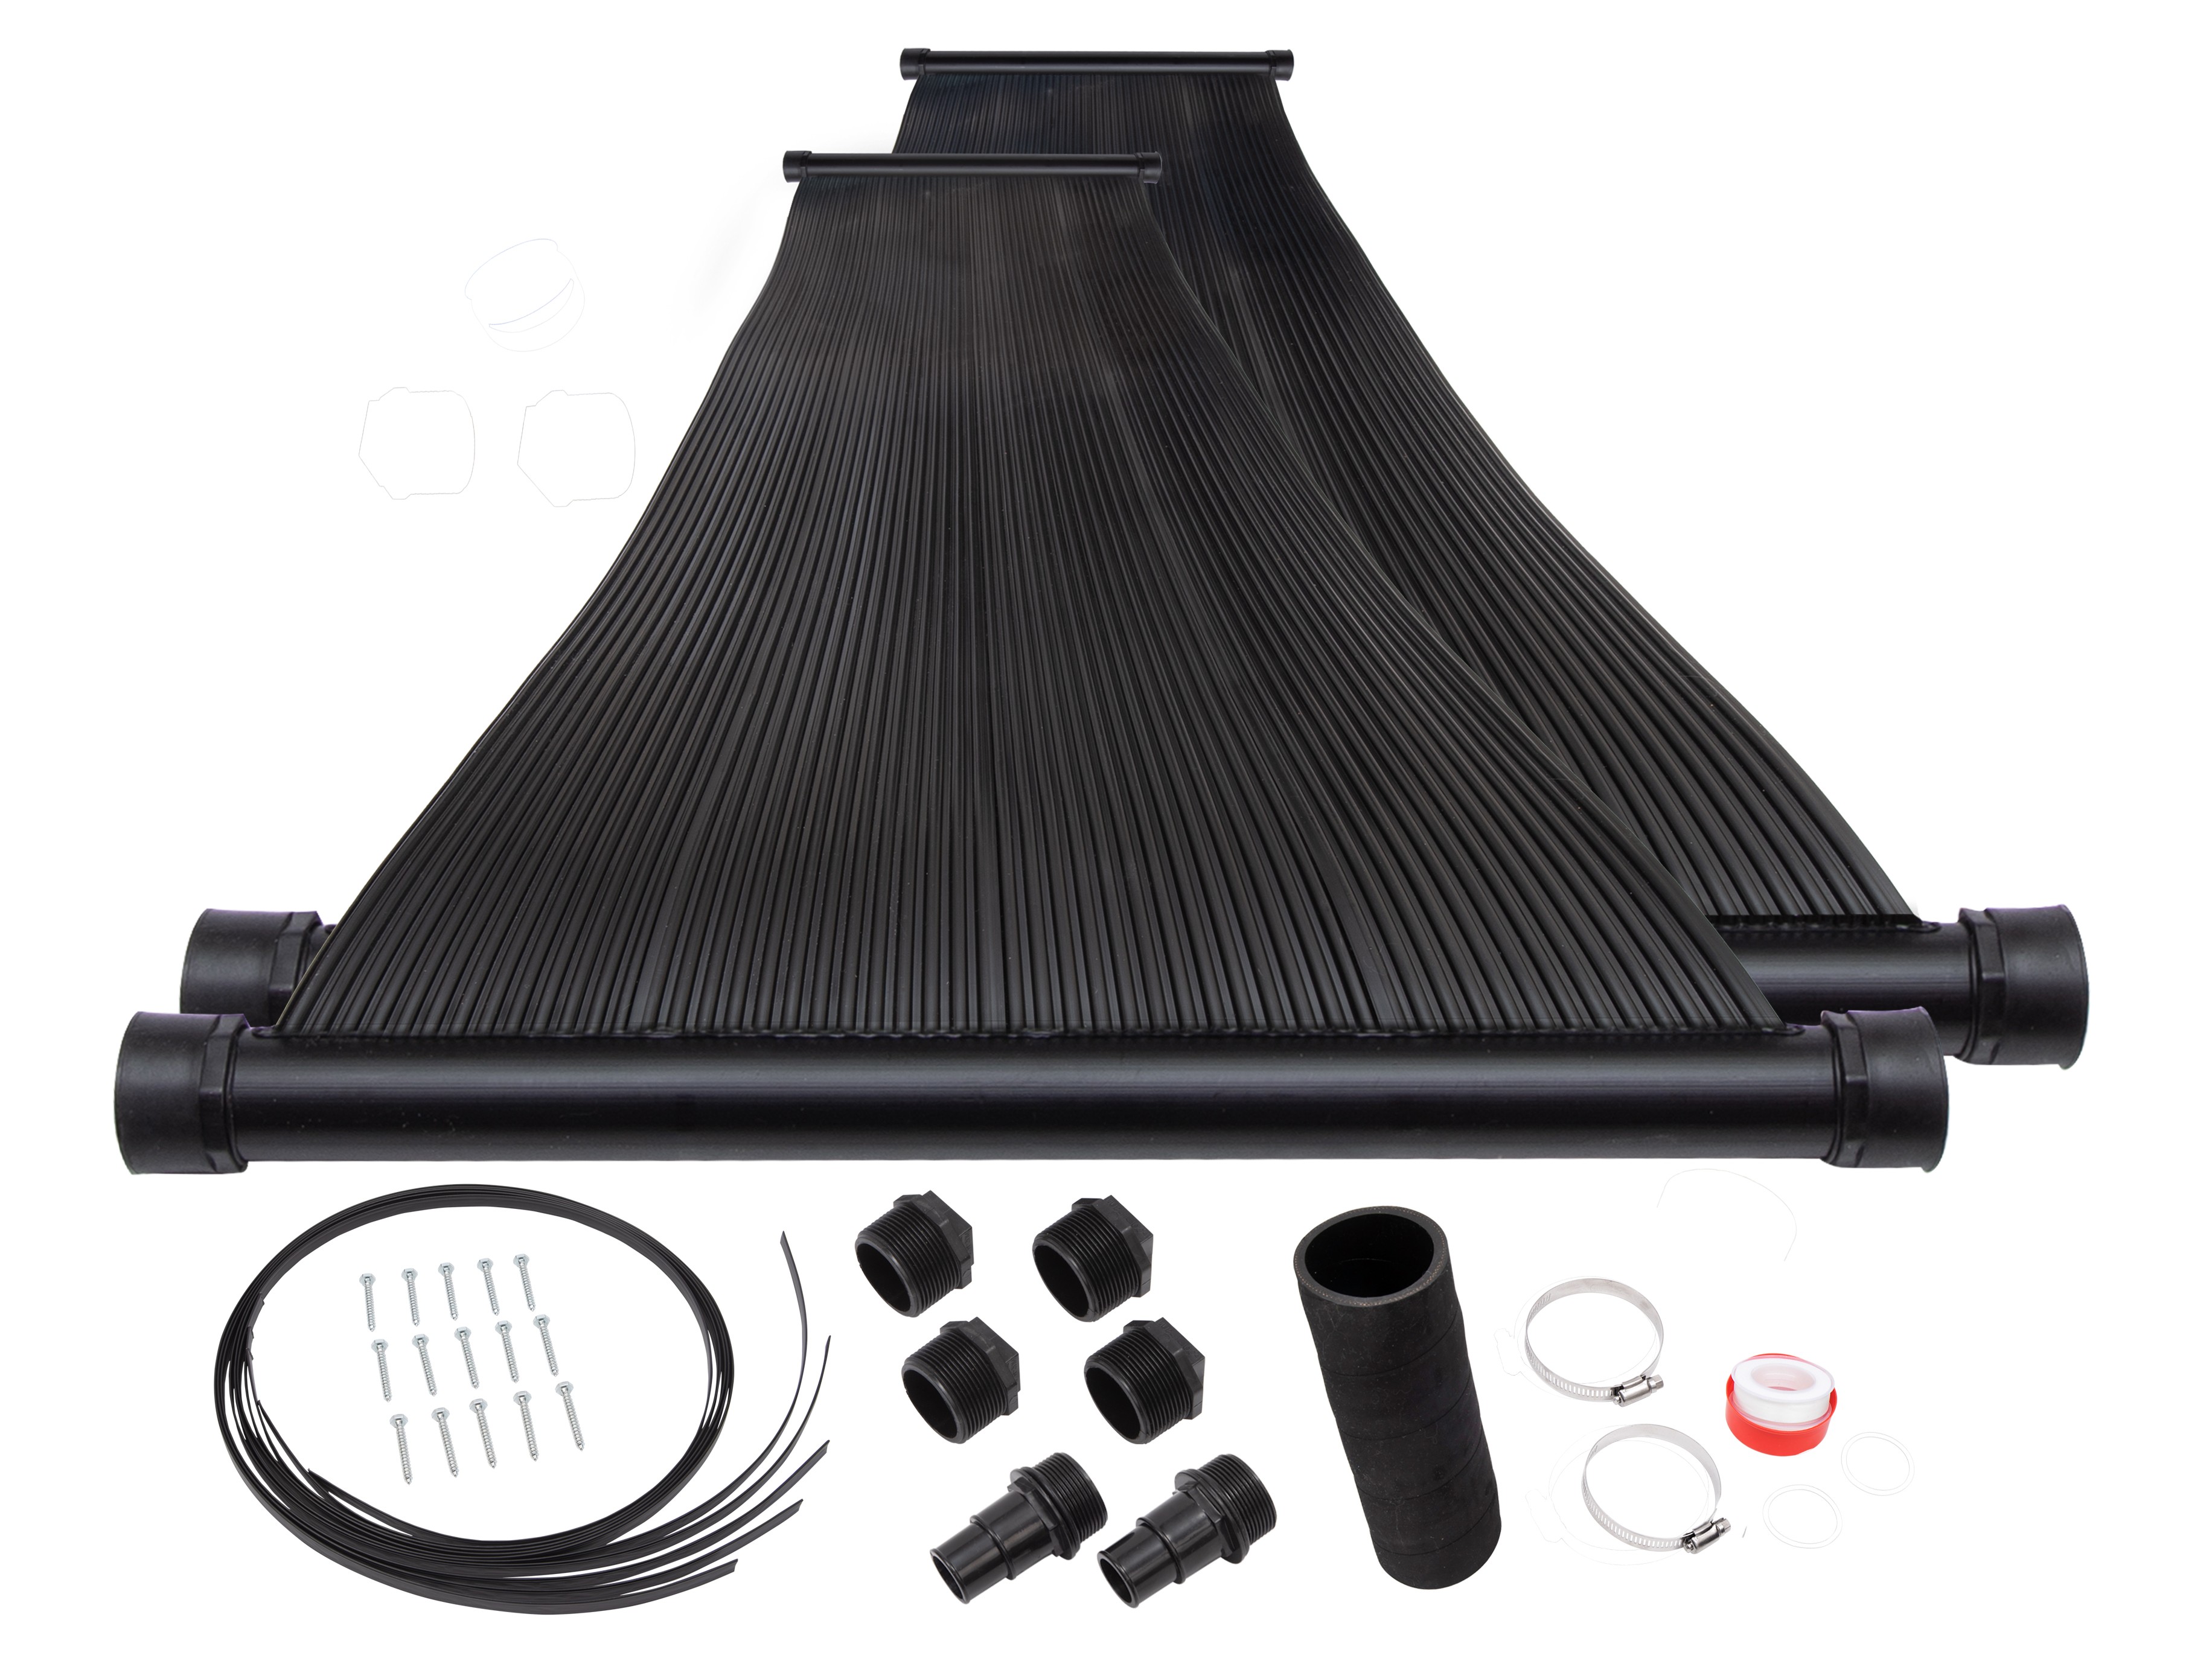 2-2'X10' SunQuest Solar Swimming Pool Heater with Roof/Rack Mounting Kit